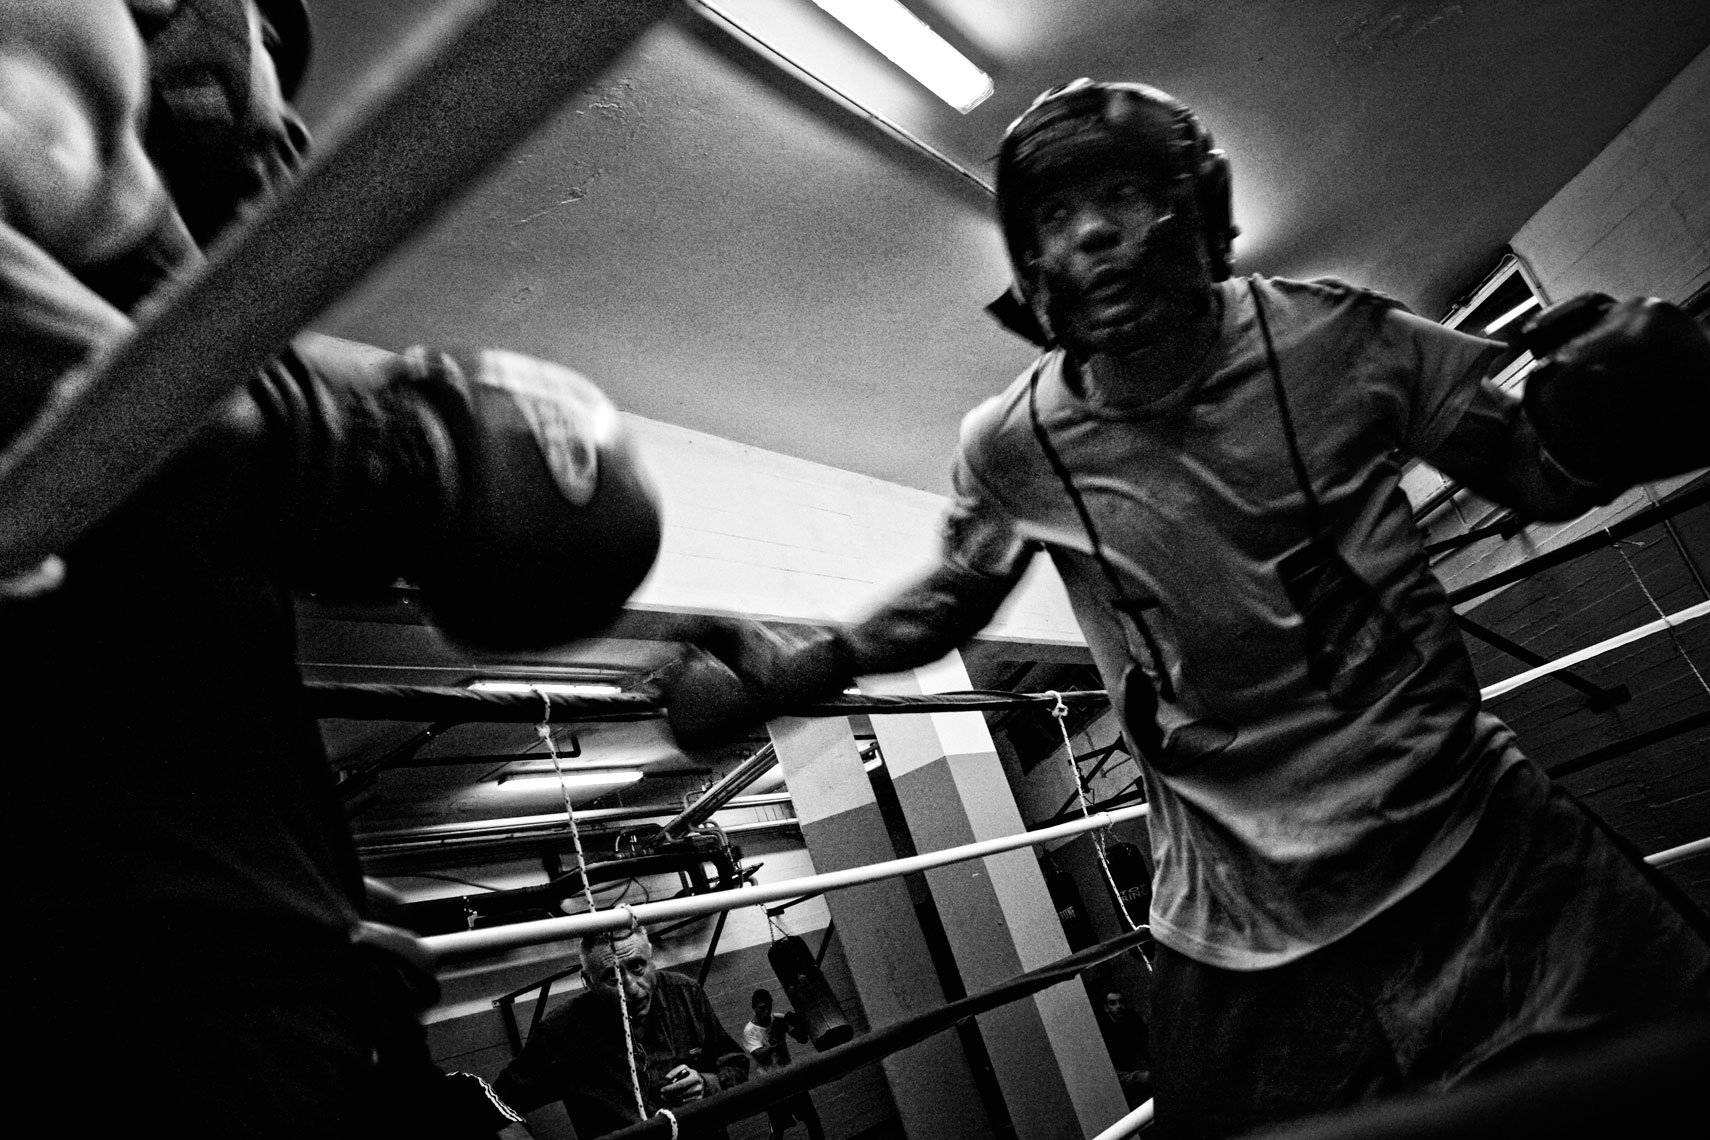 ITALY. Florence, 13th October 2011. Leonard Bundu fighting against a sparring partner in preparation of the match for the EBU (European Boxing Union) Welter Weight crown.